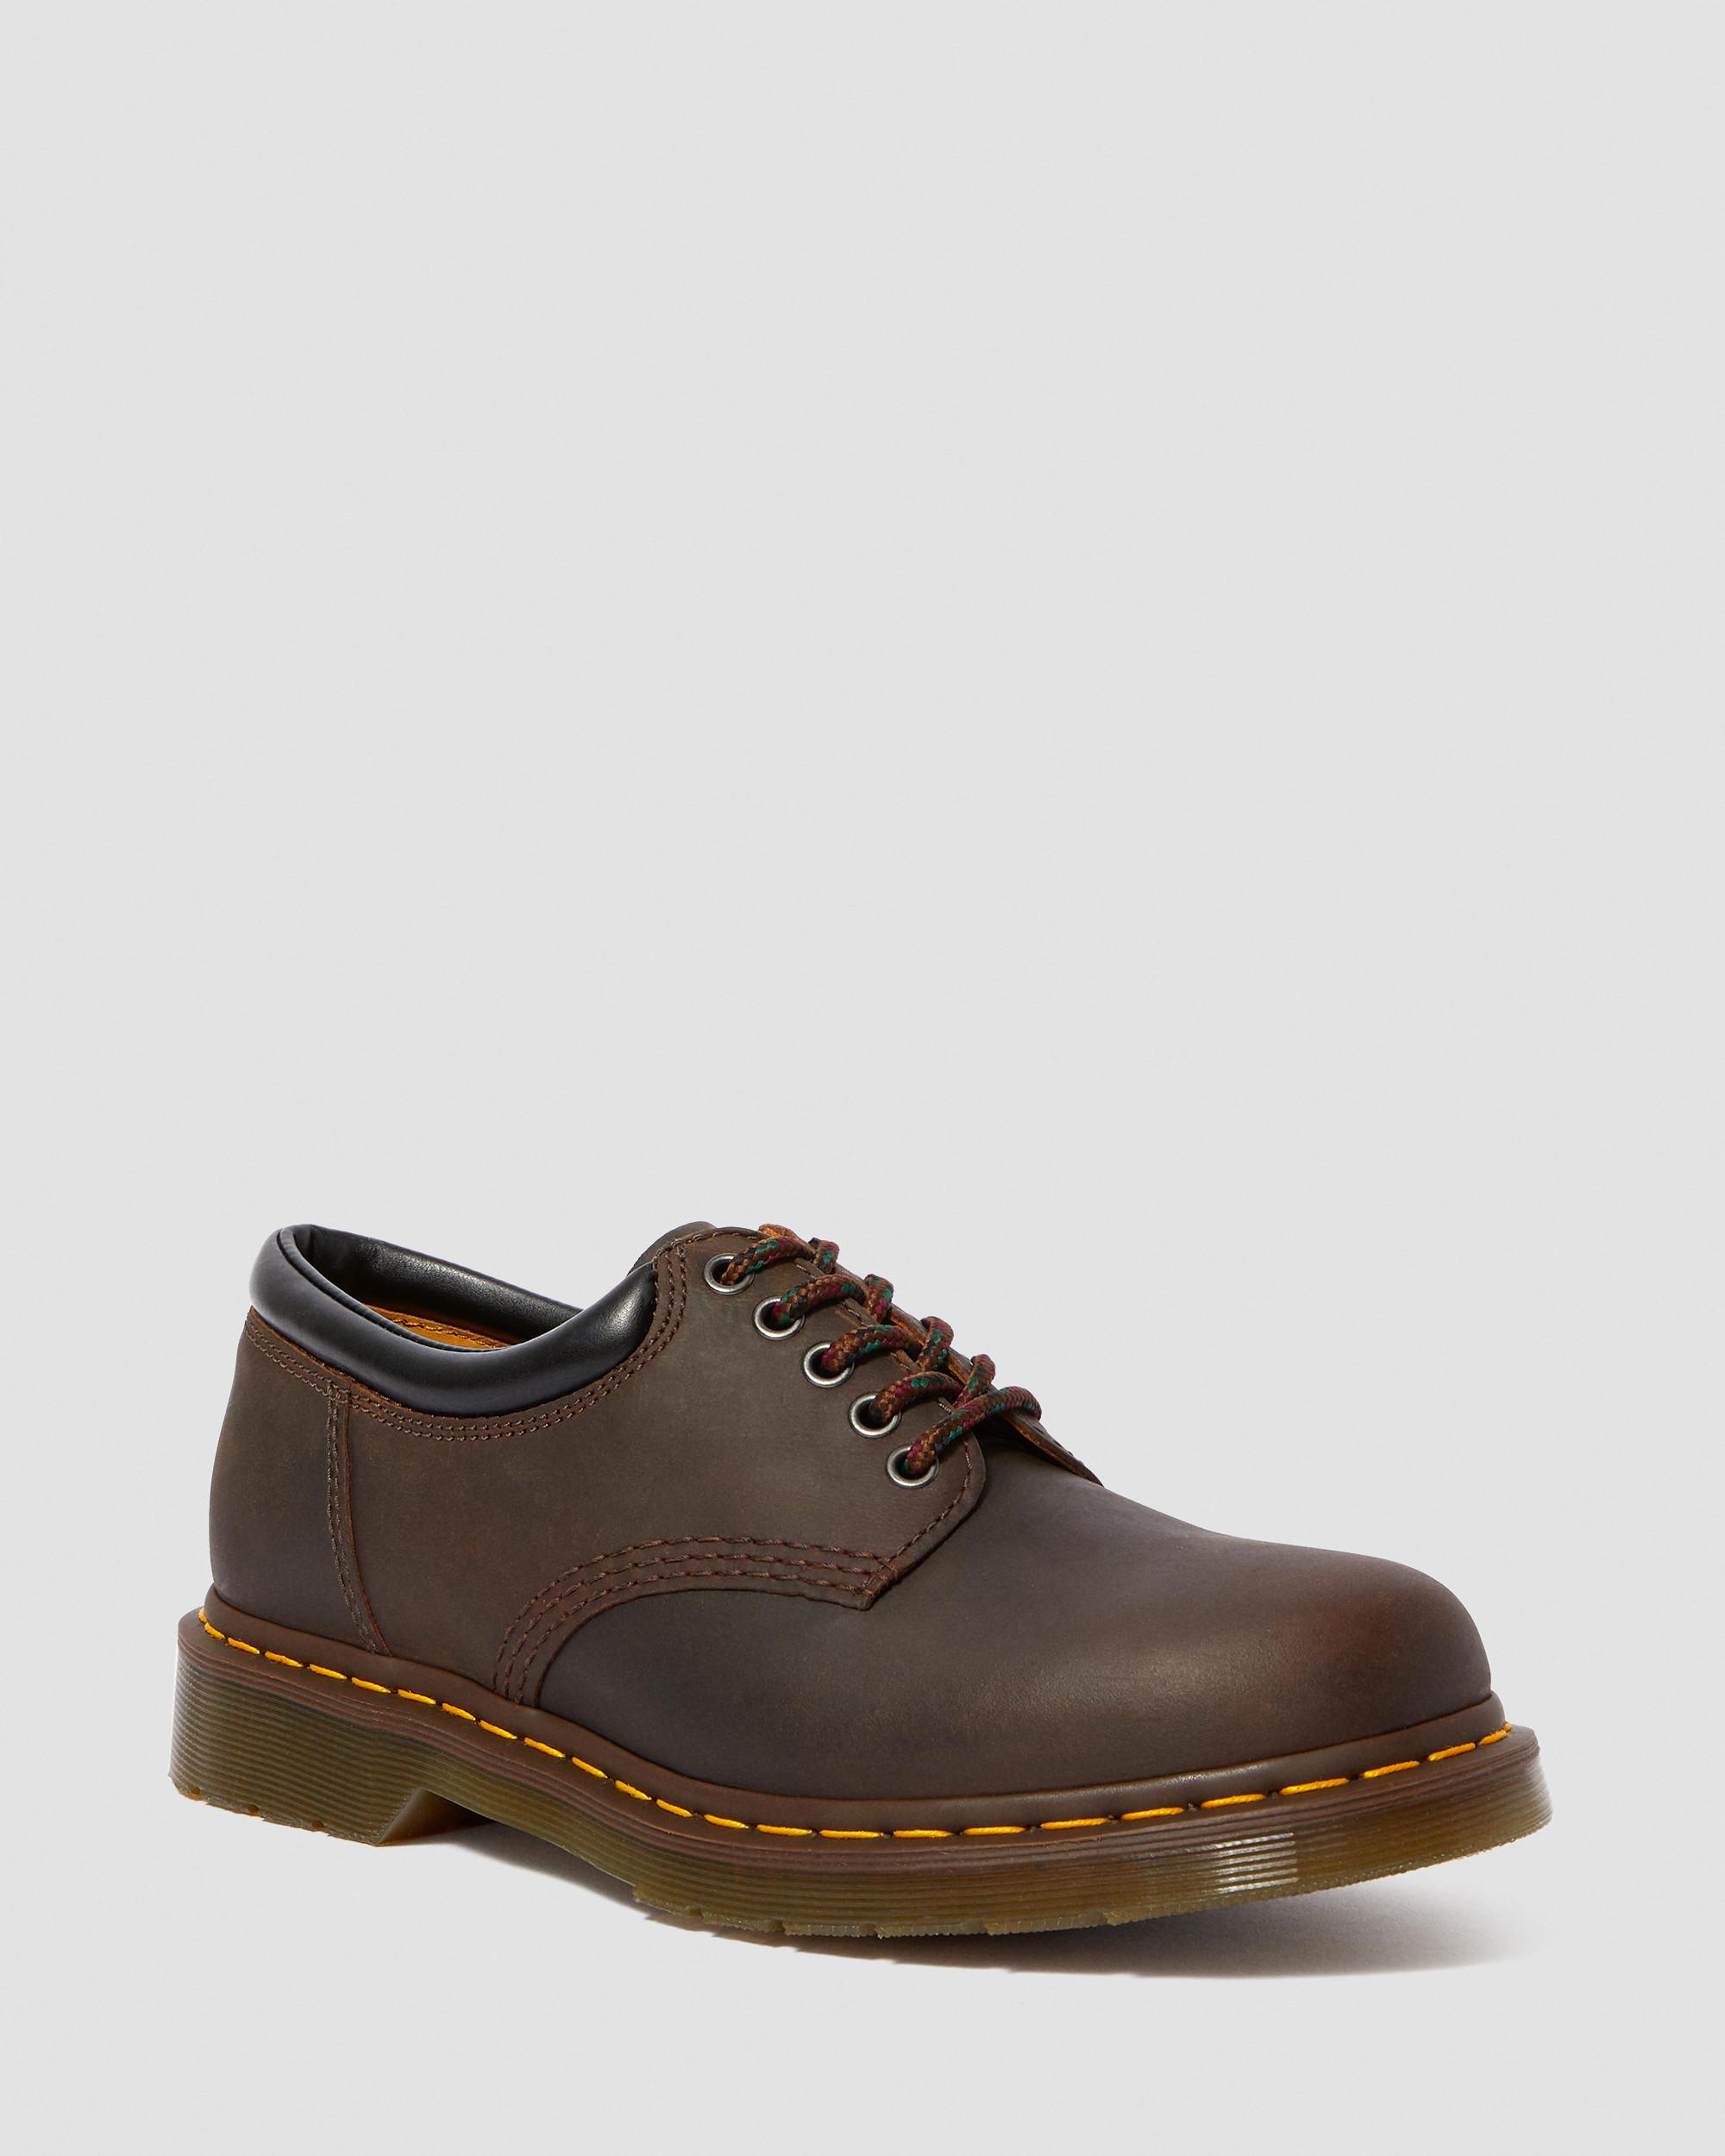 8053 CRAZY HORSE LEATHER CASUAL SHOES | Dr. Martens Official